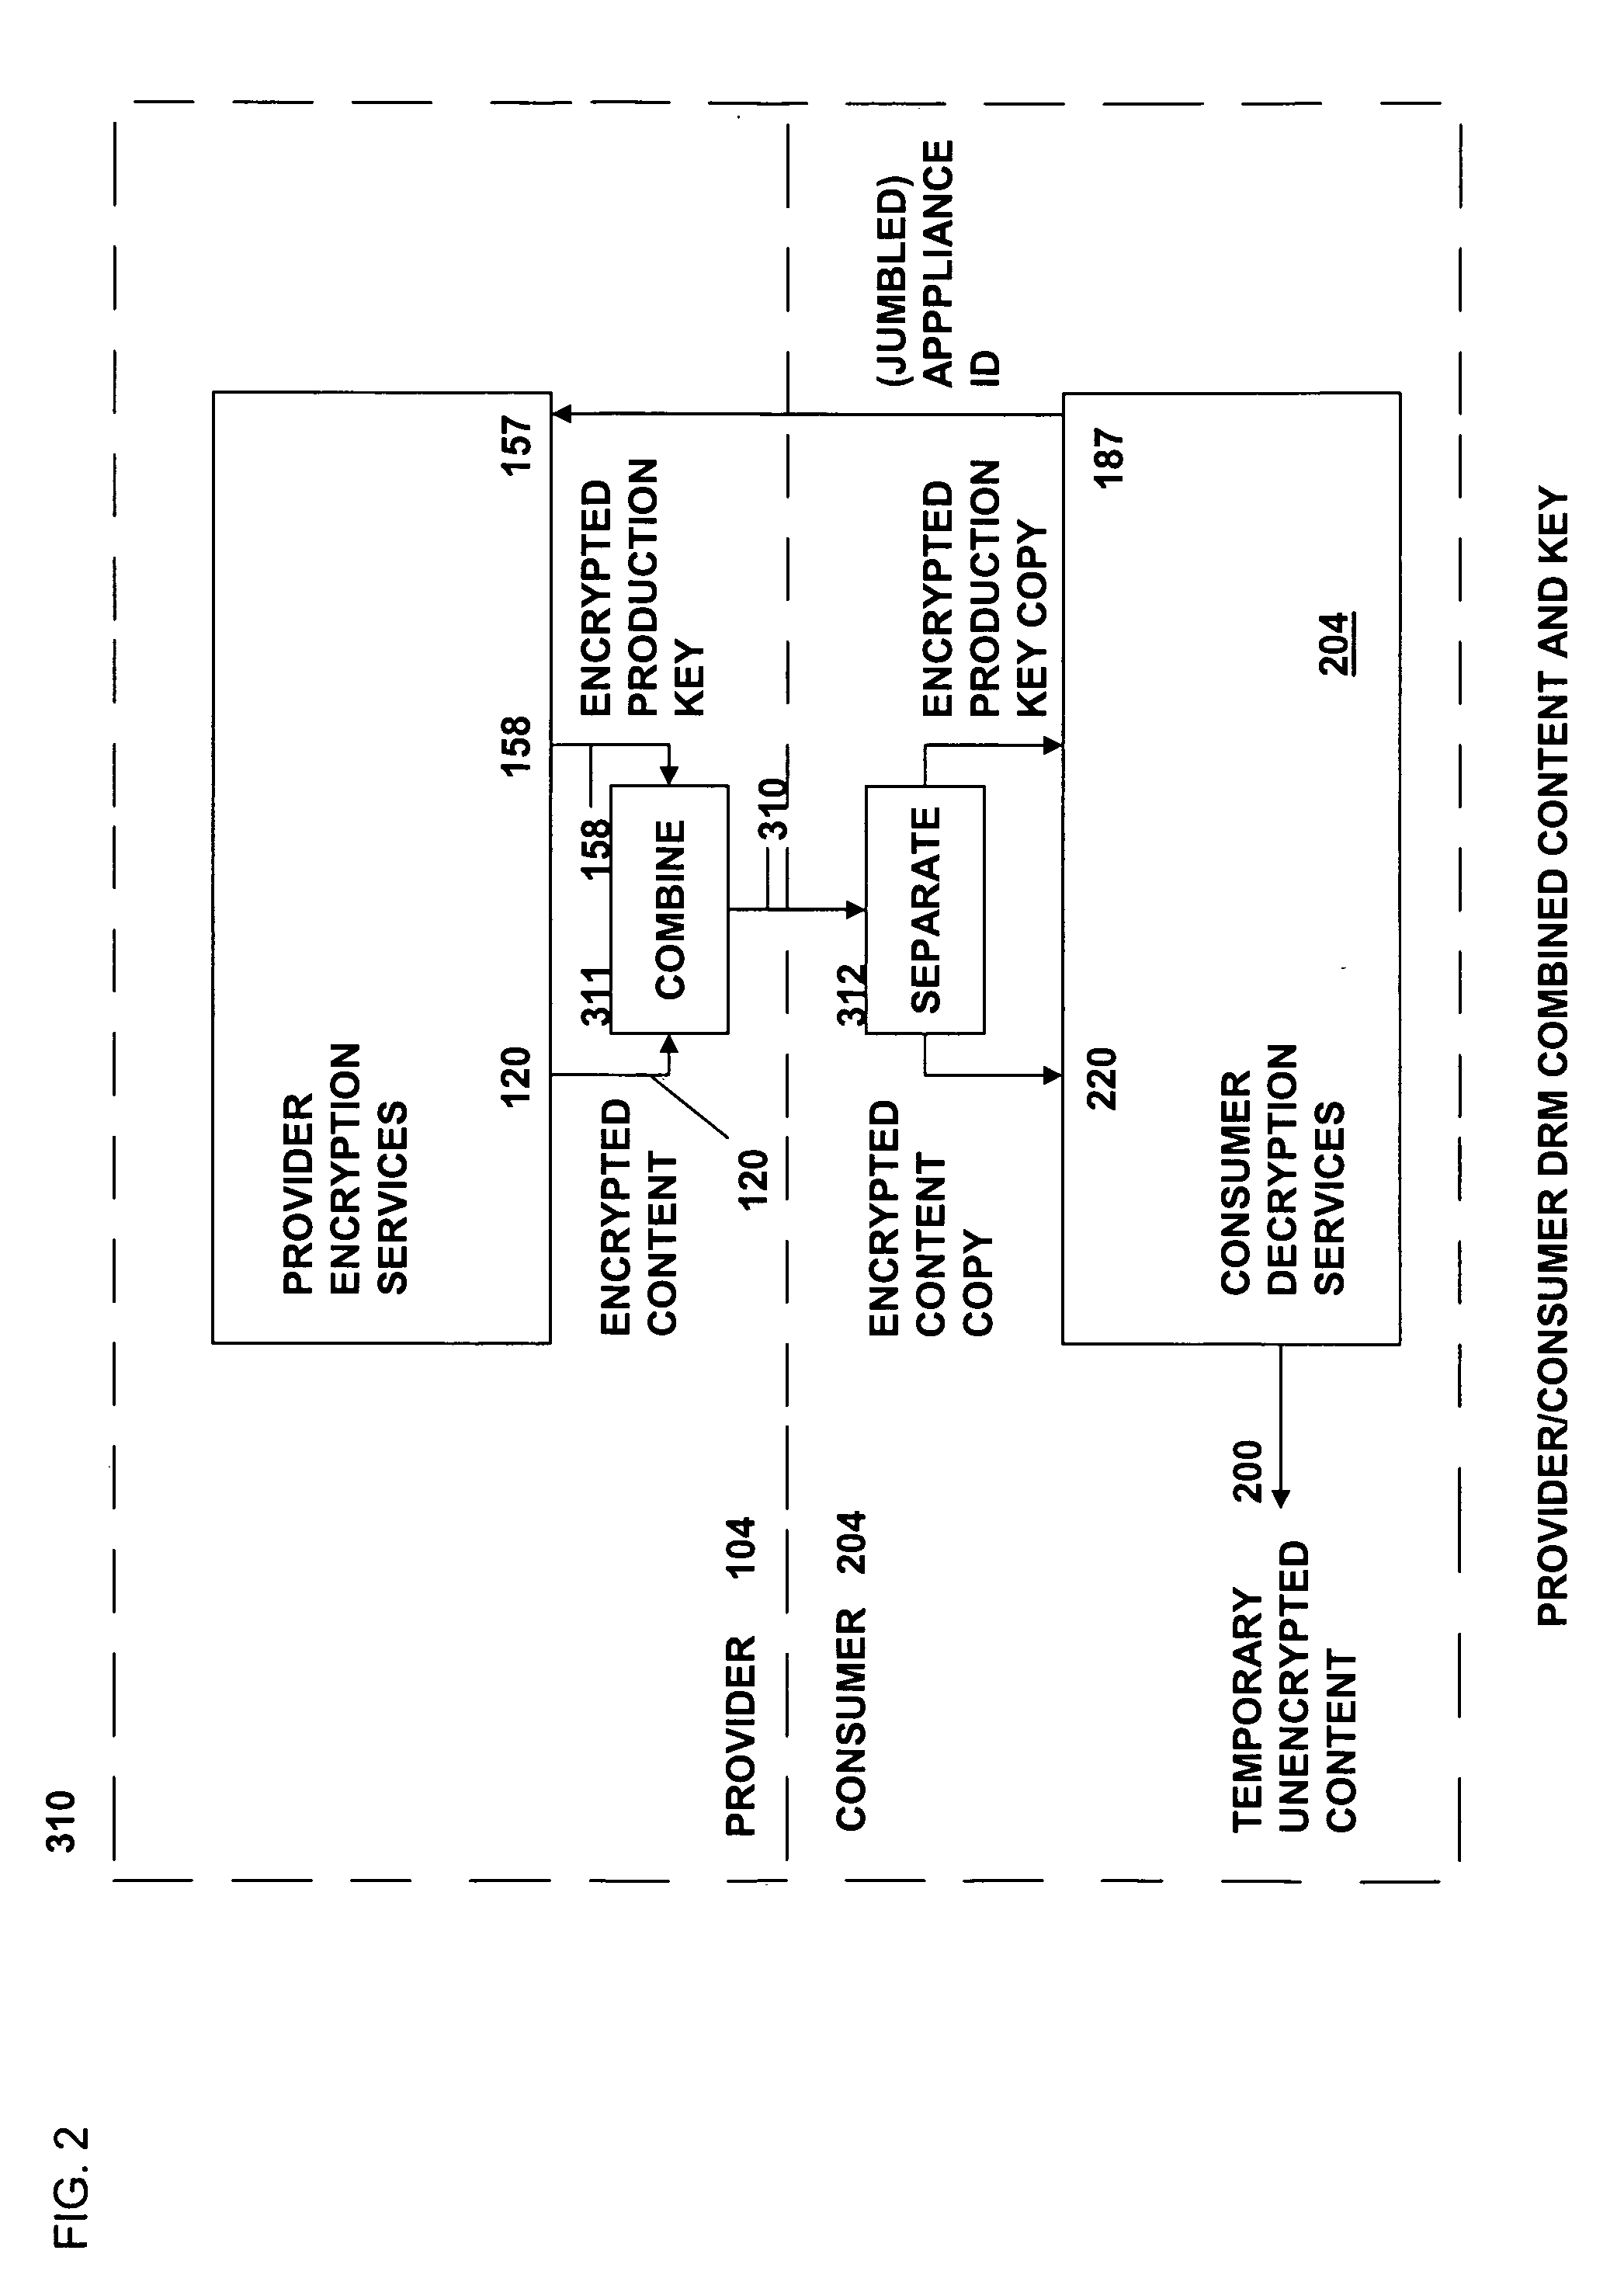 Method and system for secure distribution of selected content to be protected